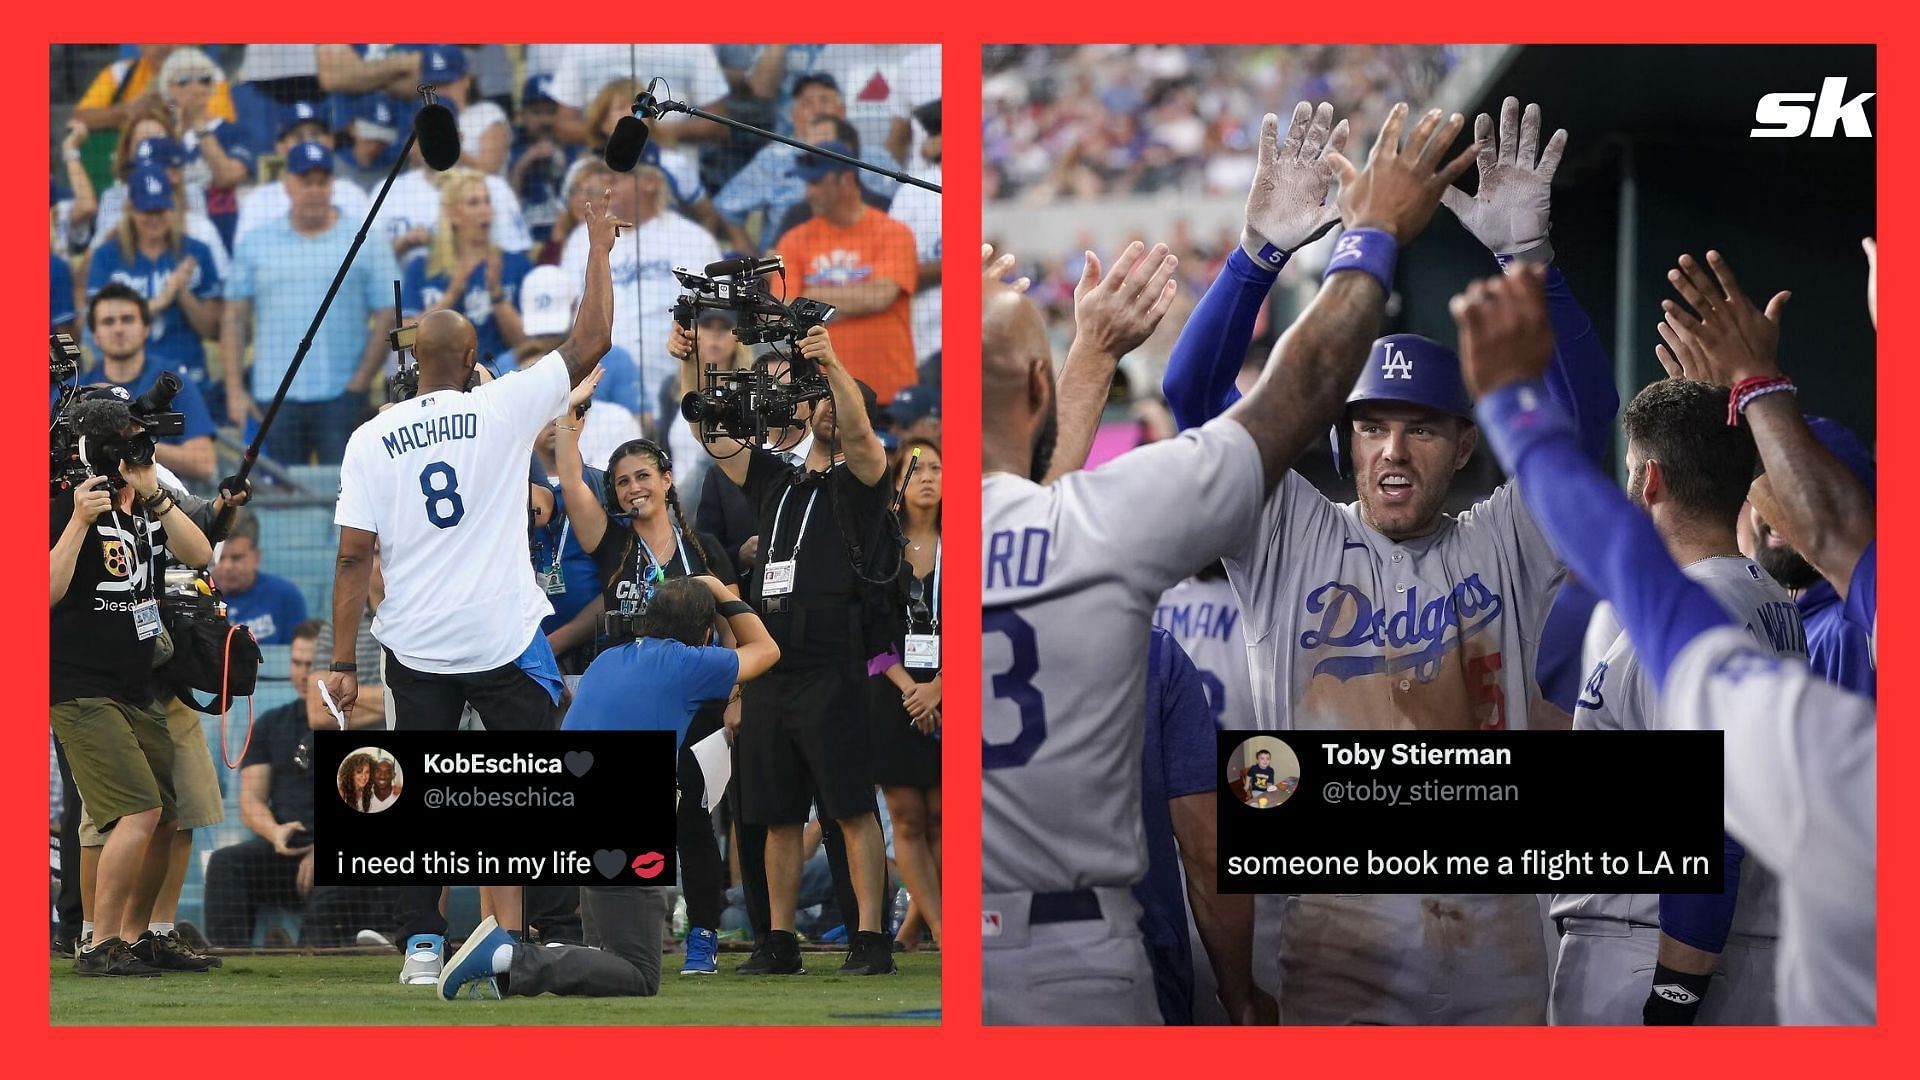 Los Angeles Dodgers fans love the Kobe Bryant tribute